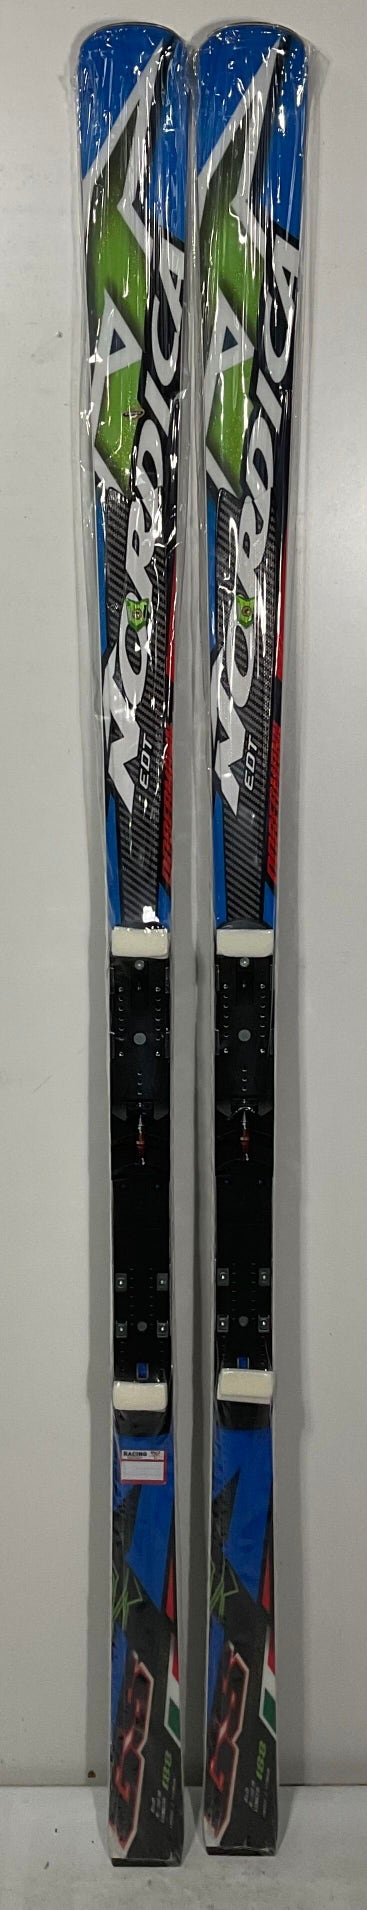 New Nordica 188cm Racing Dobermann GS WC EDT Skis Without Bindings